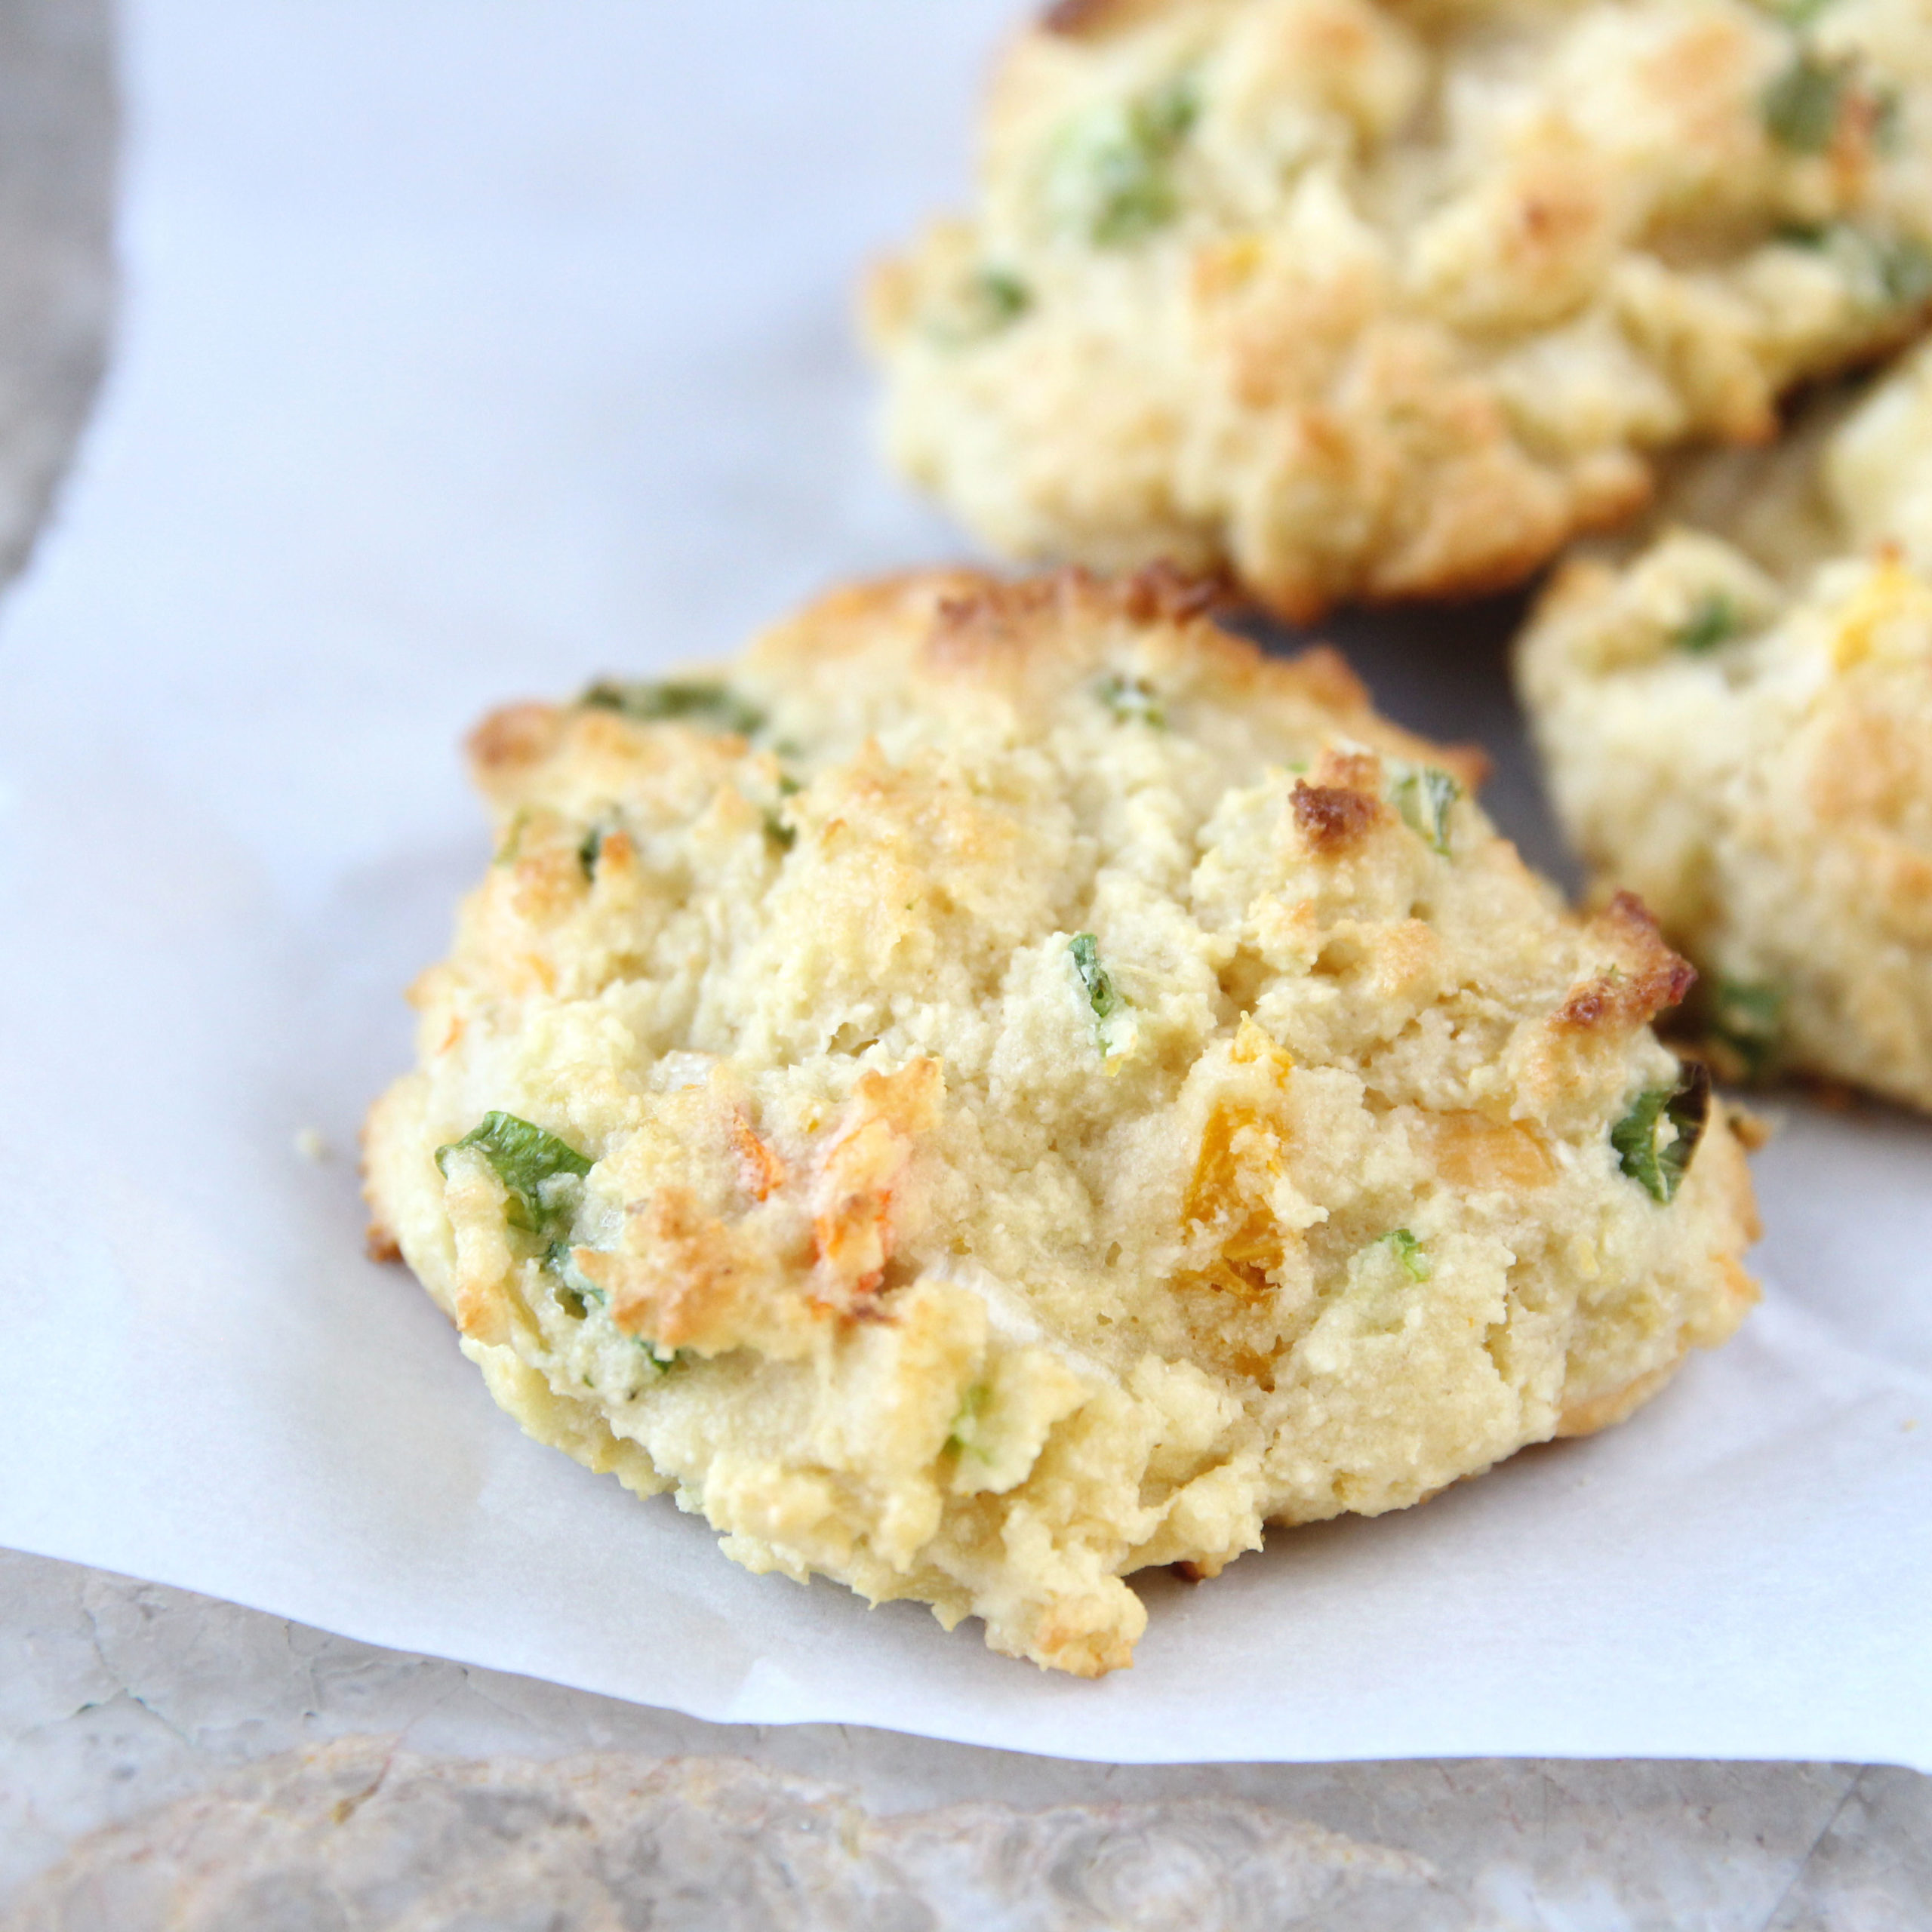 How to Make Gluten-Free Cheddar Drop Biscuits made with Cauliflower - Pão de Queijo